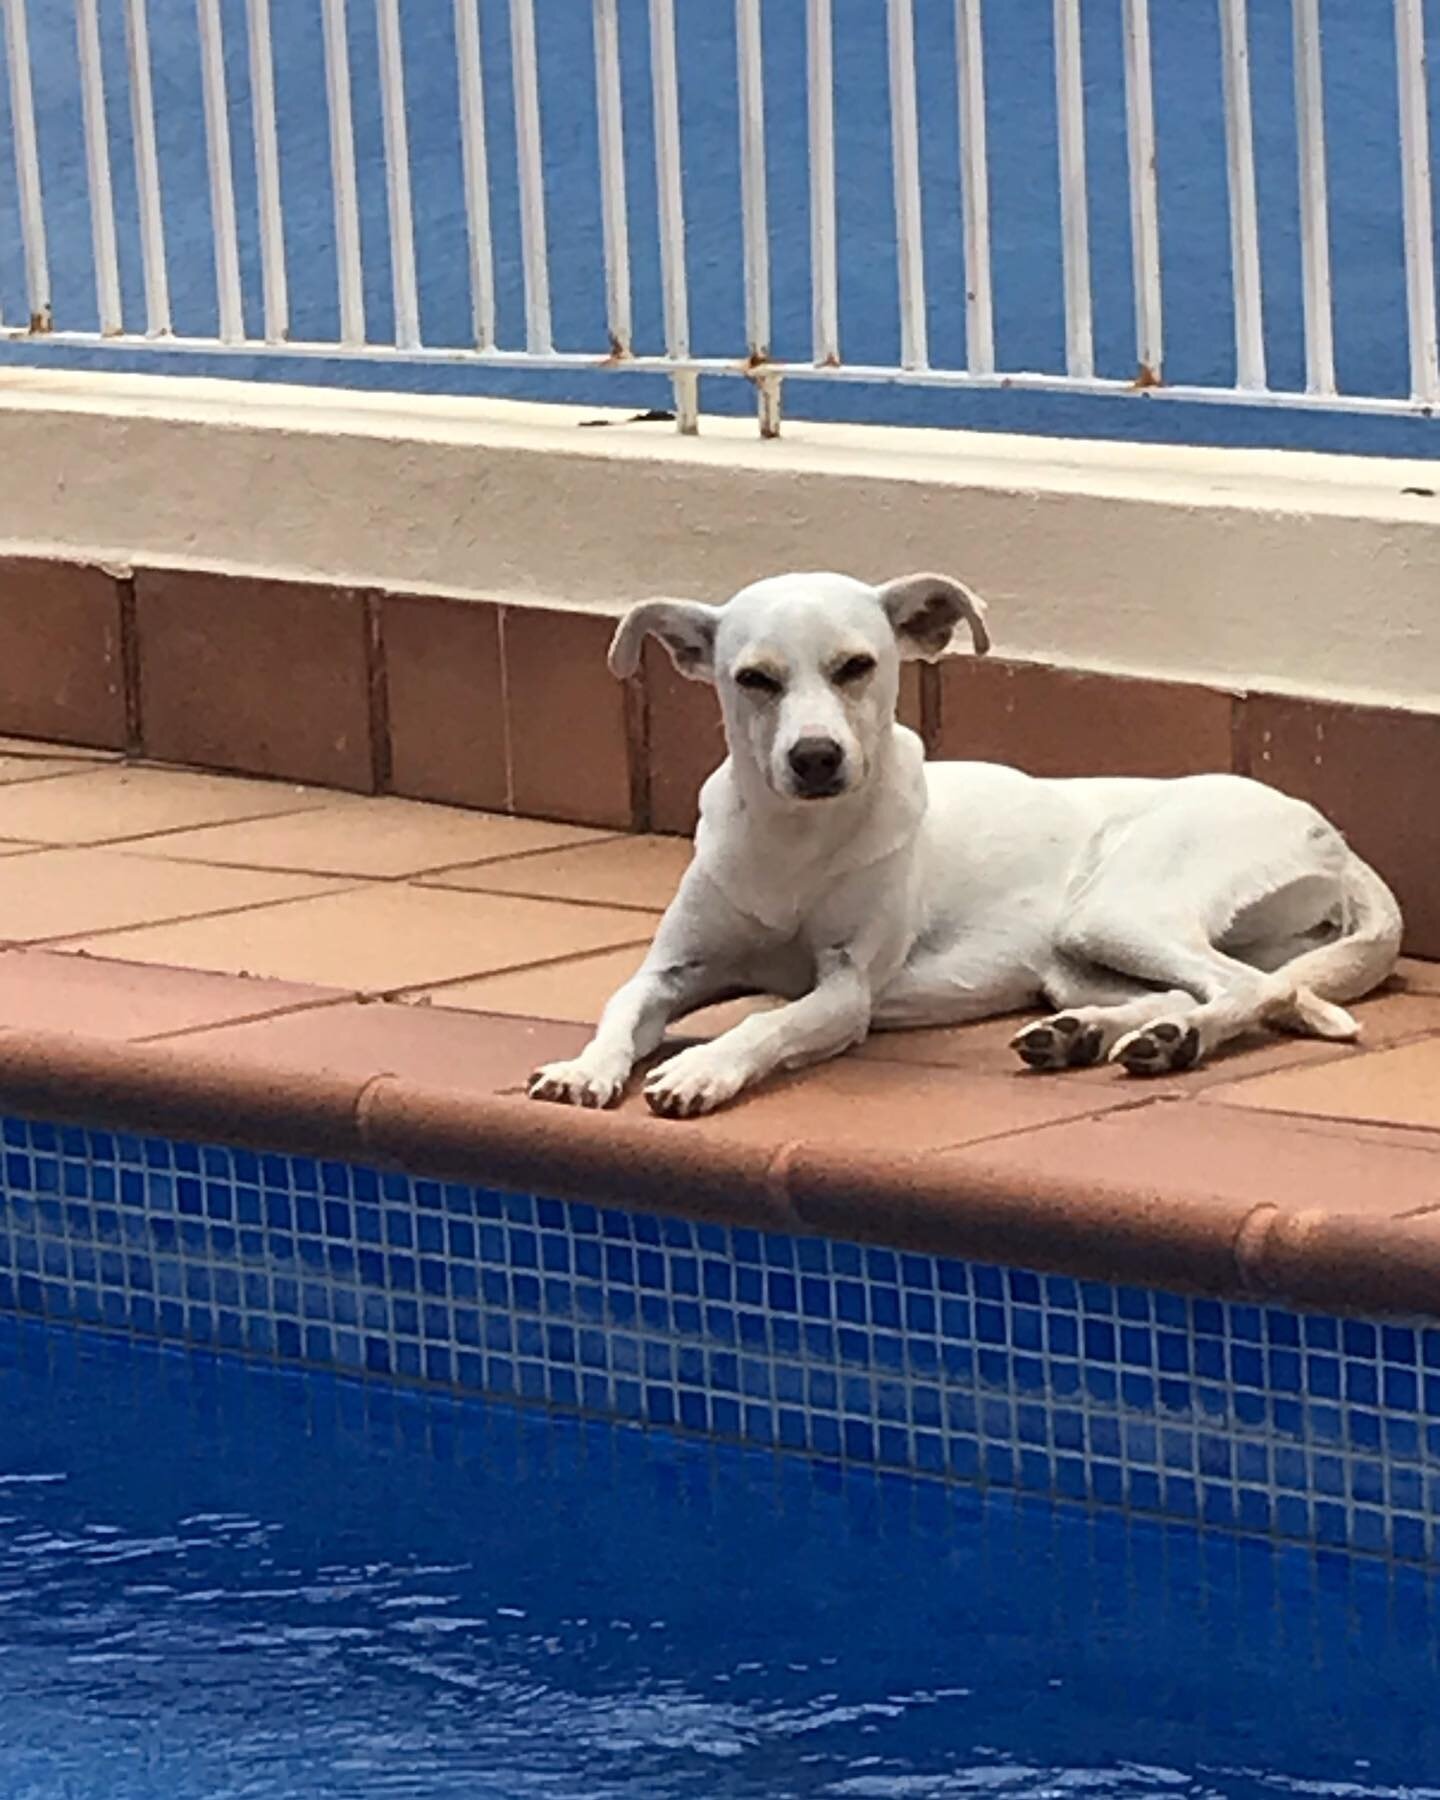 Dog wear design #photomodel #testingteam  dog Sally can also relax and take it easy at the pool #poolday